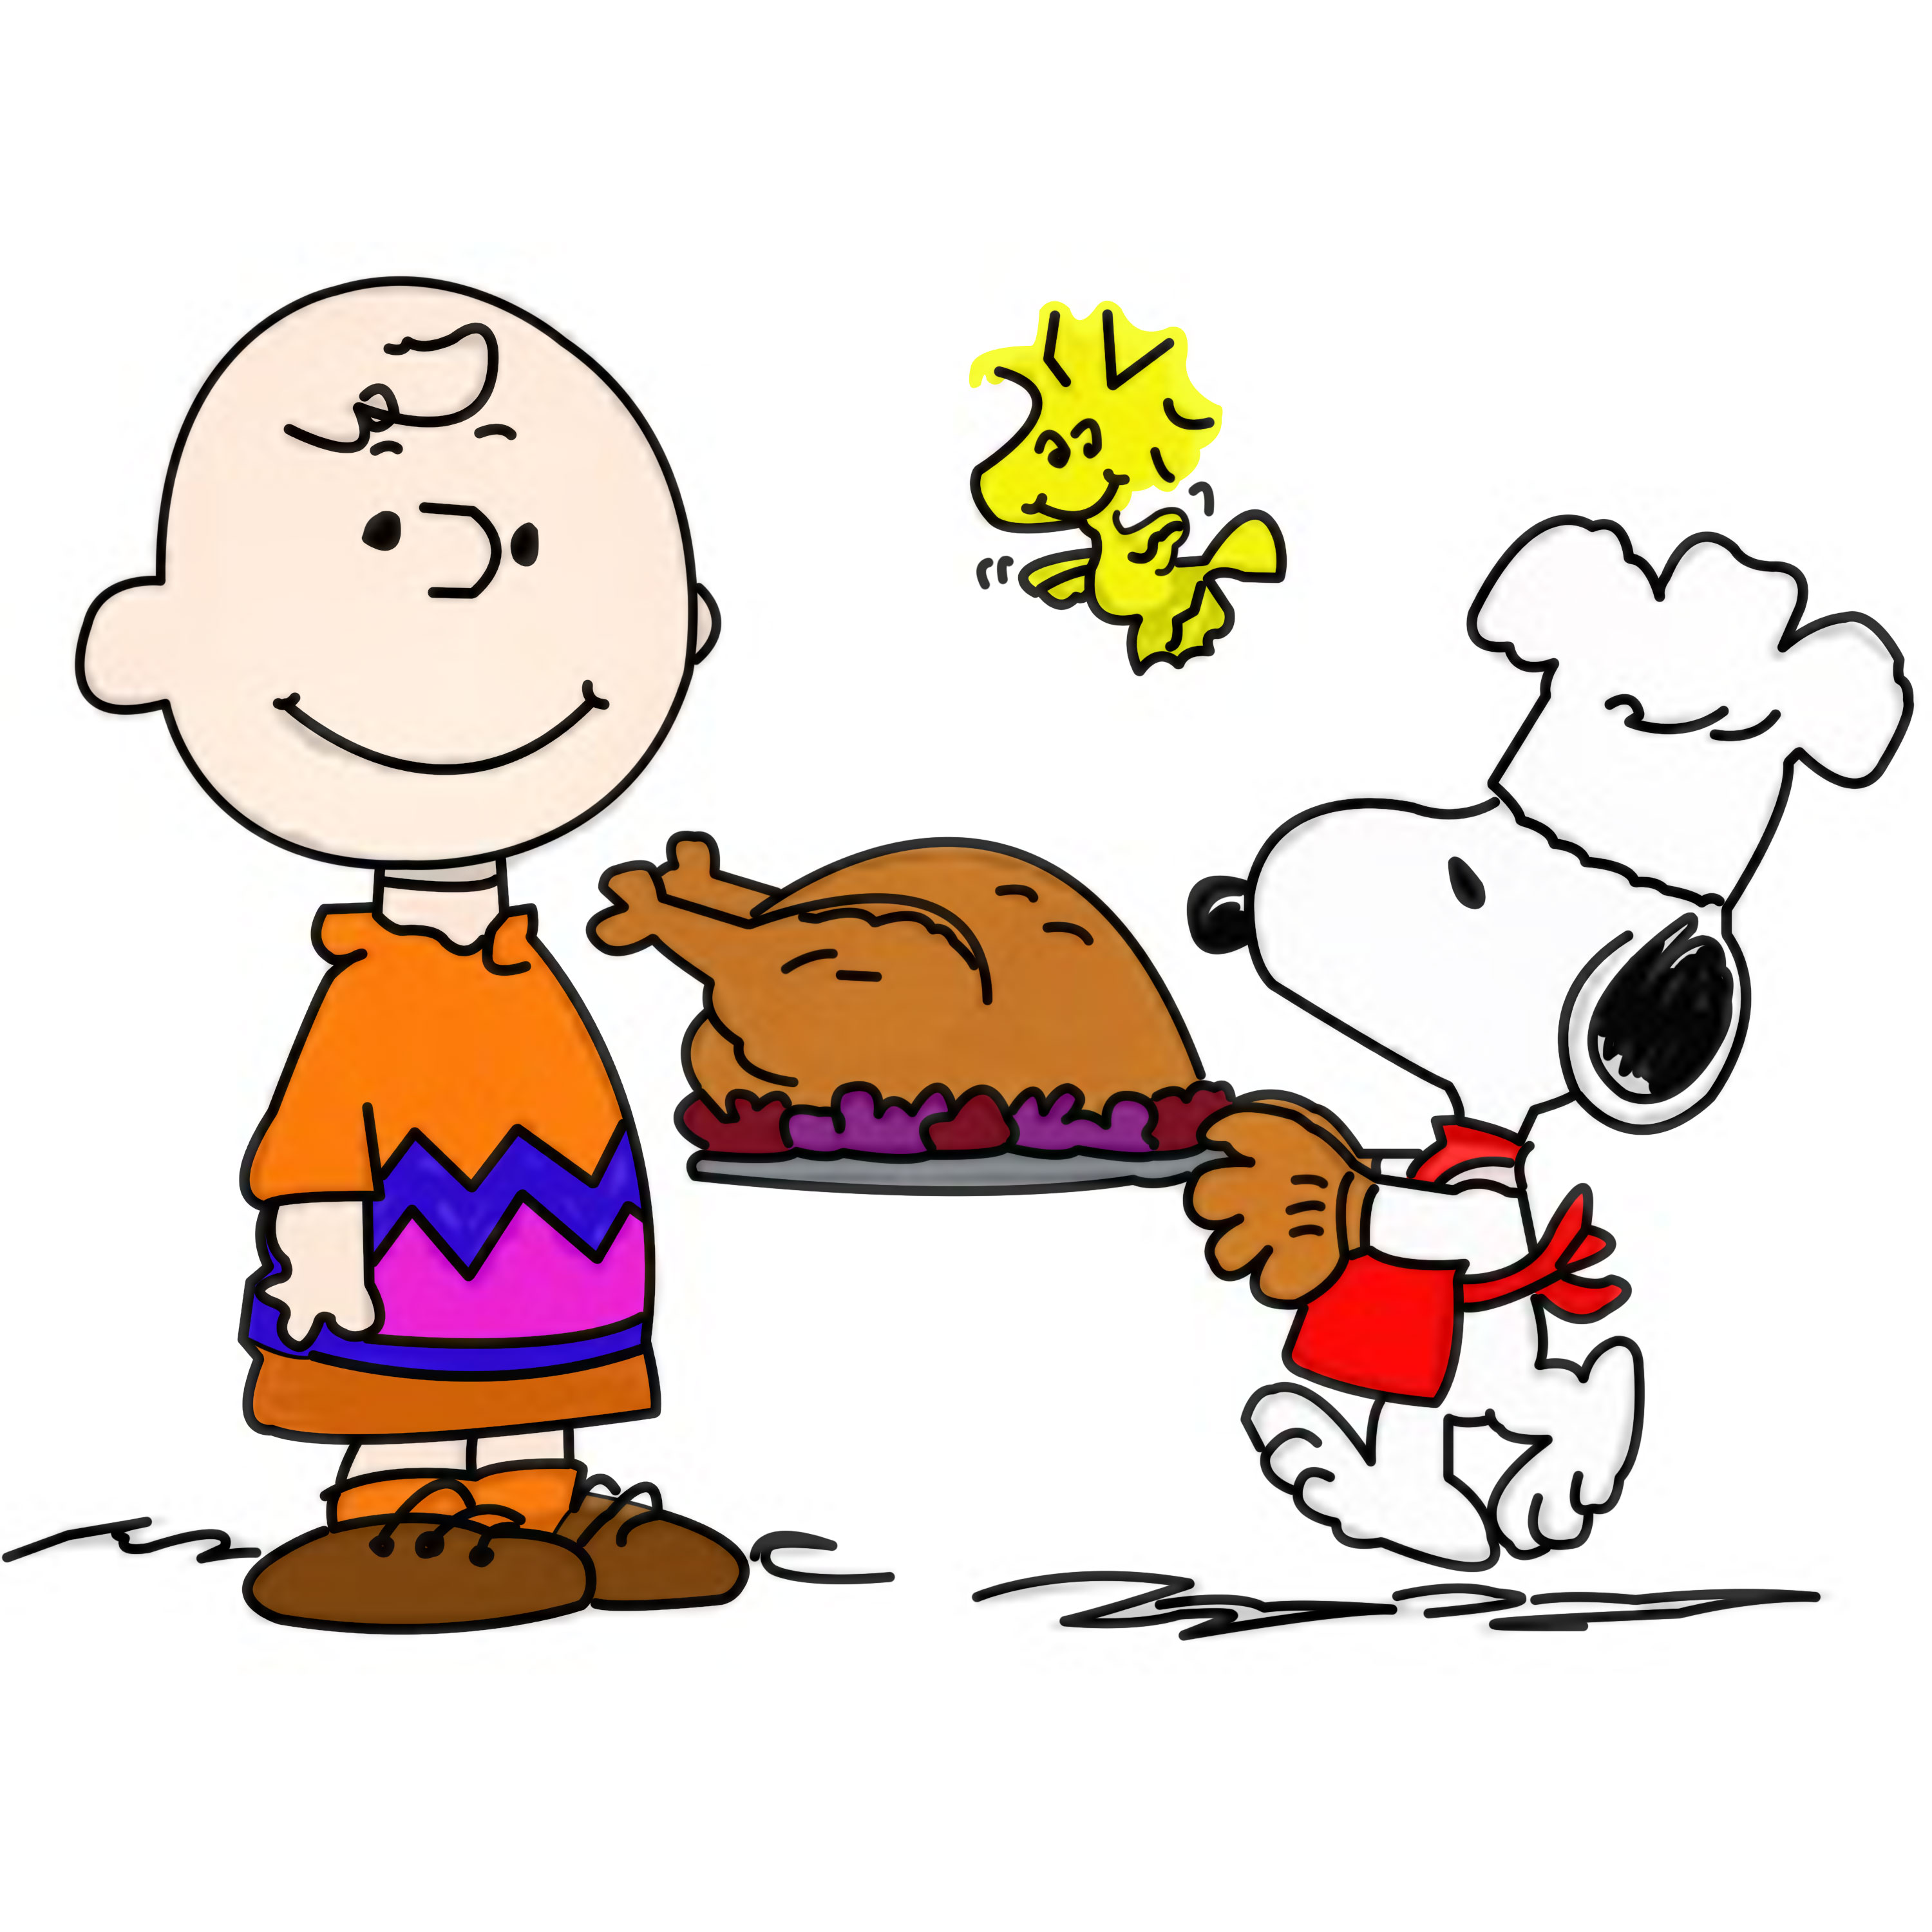 Snoopy Thanksgiving Quotes.